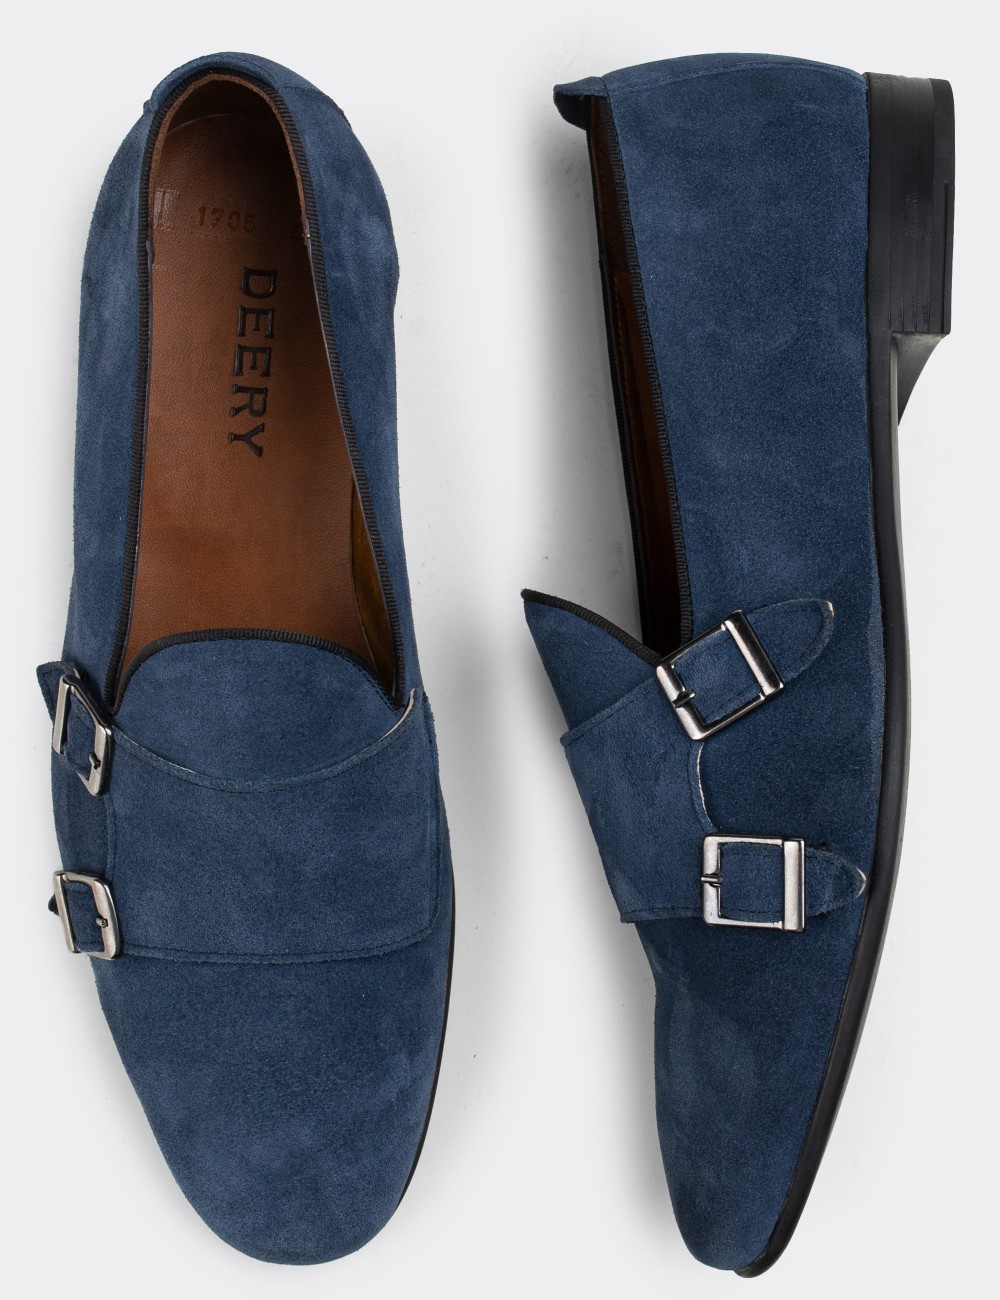 Blue Suede Leather Monk-Strap Loafers - 01705MMVIC01